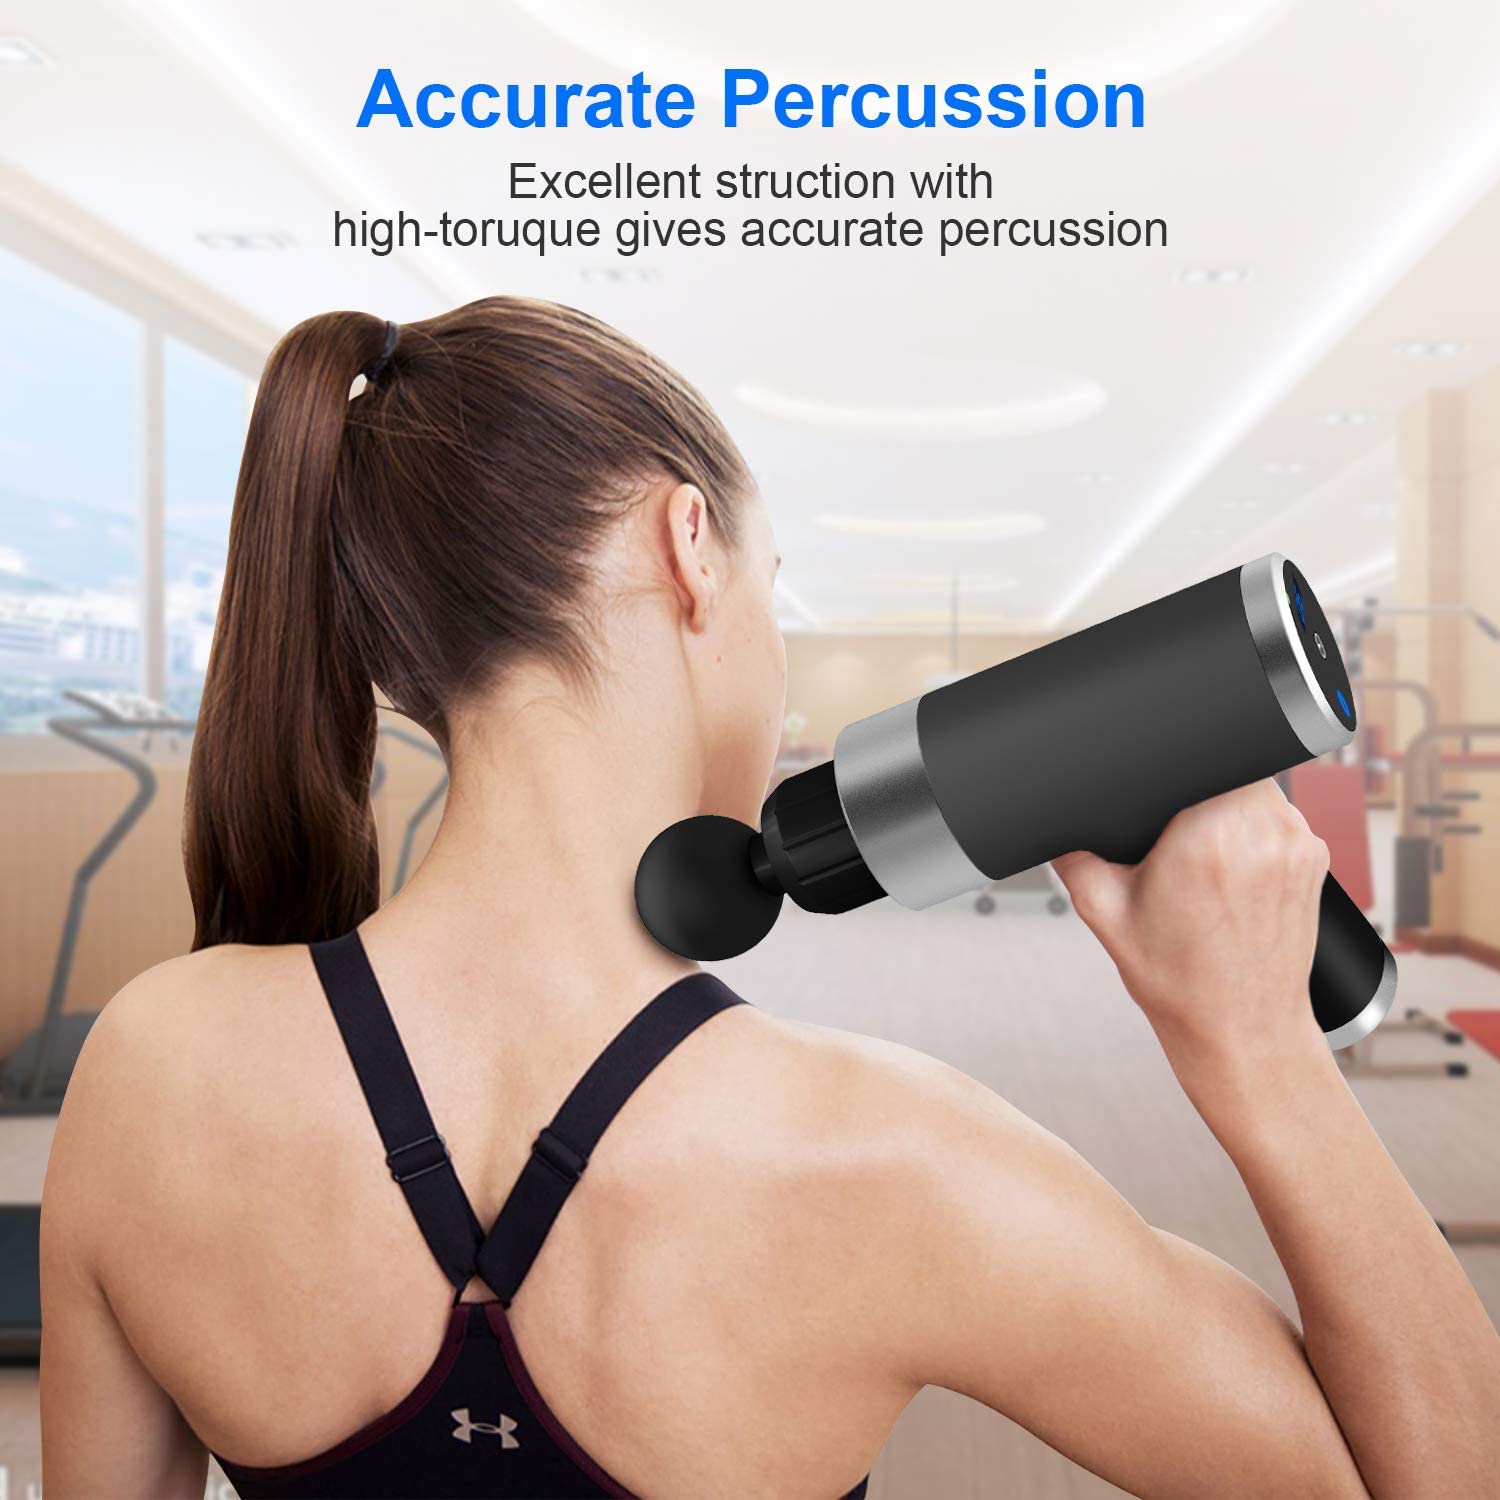 Cotsoco Muscle Massage Gun Deep Tissue, Handheld Body Massager for Pain Relief , 6 Speed Rechargeable Percussion Massager Gun with 4 Massage Heads and Carry Case, LCD Touch Screen&Long Battery Life